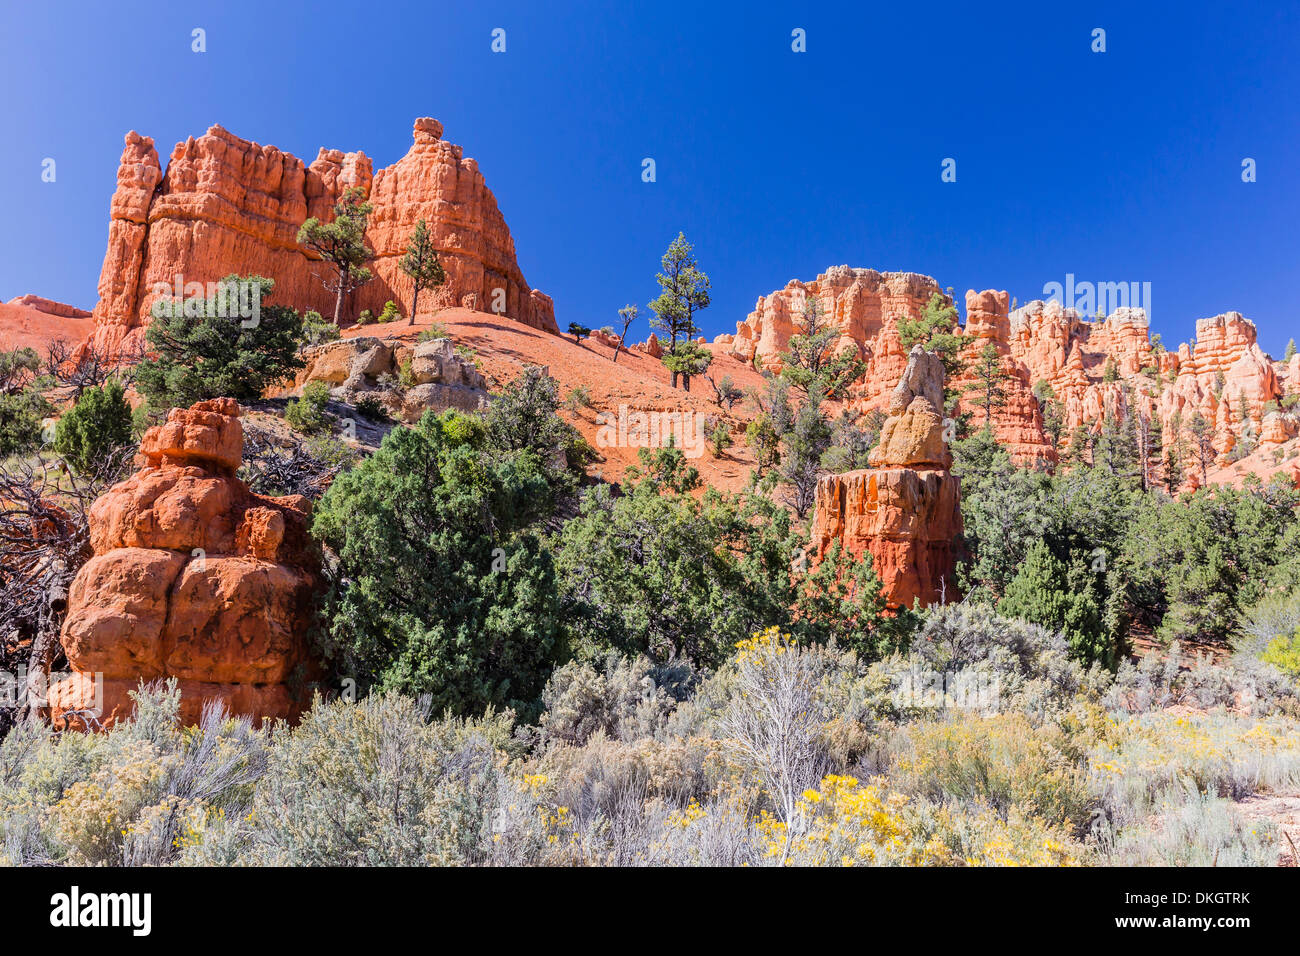 Red sandstone formations in Red Canyon, Dixie National Forest, Utah, United States of America, North America Stock Photo